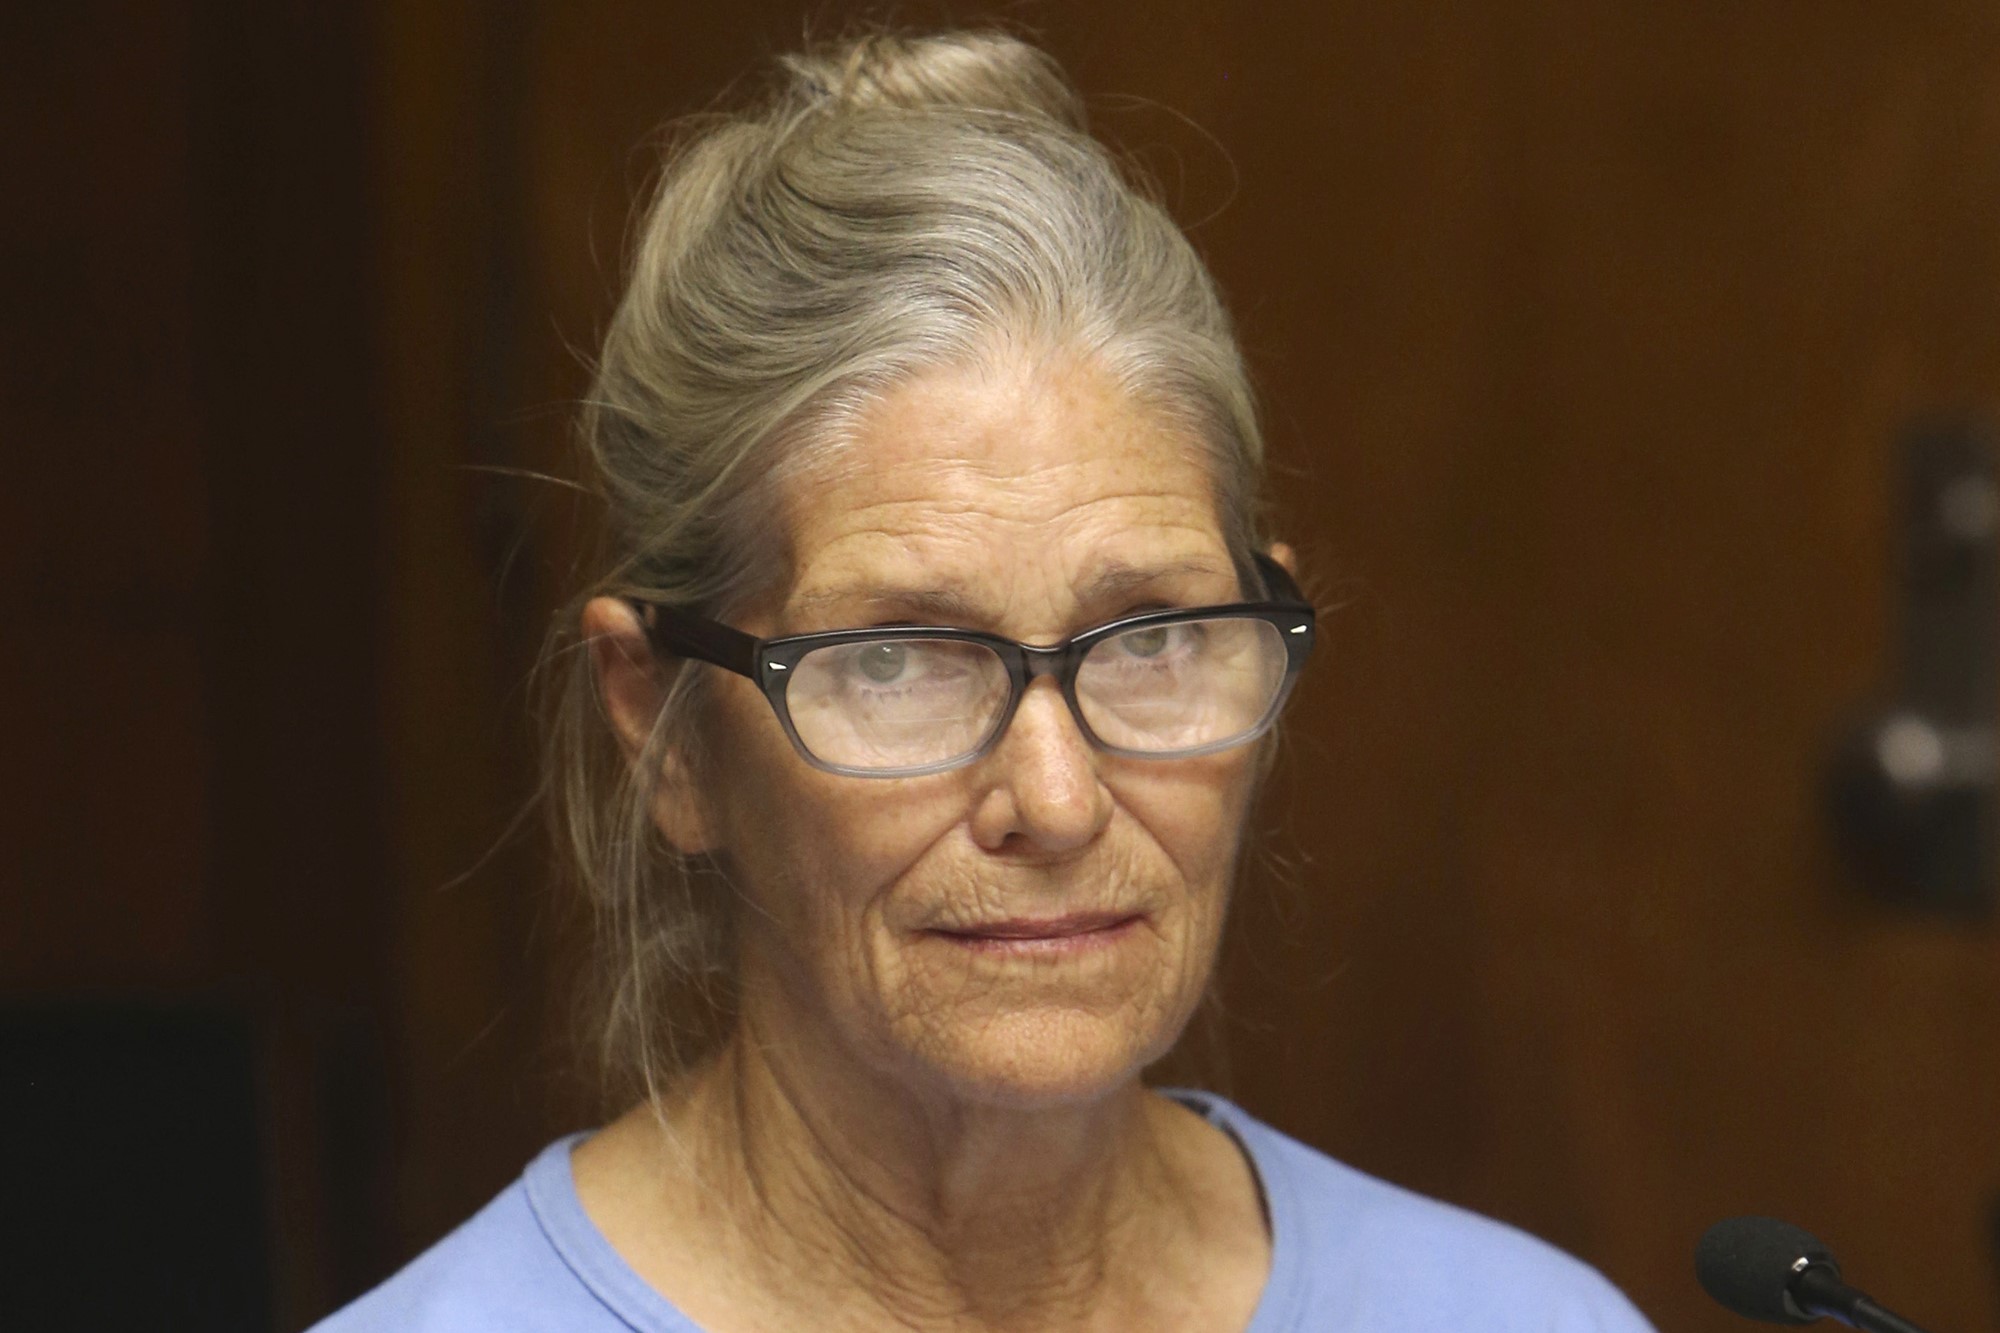 A close up of a middle-aged white woman wearing glasses